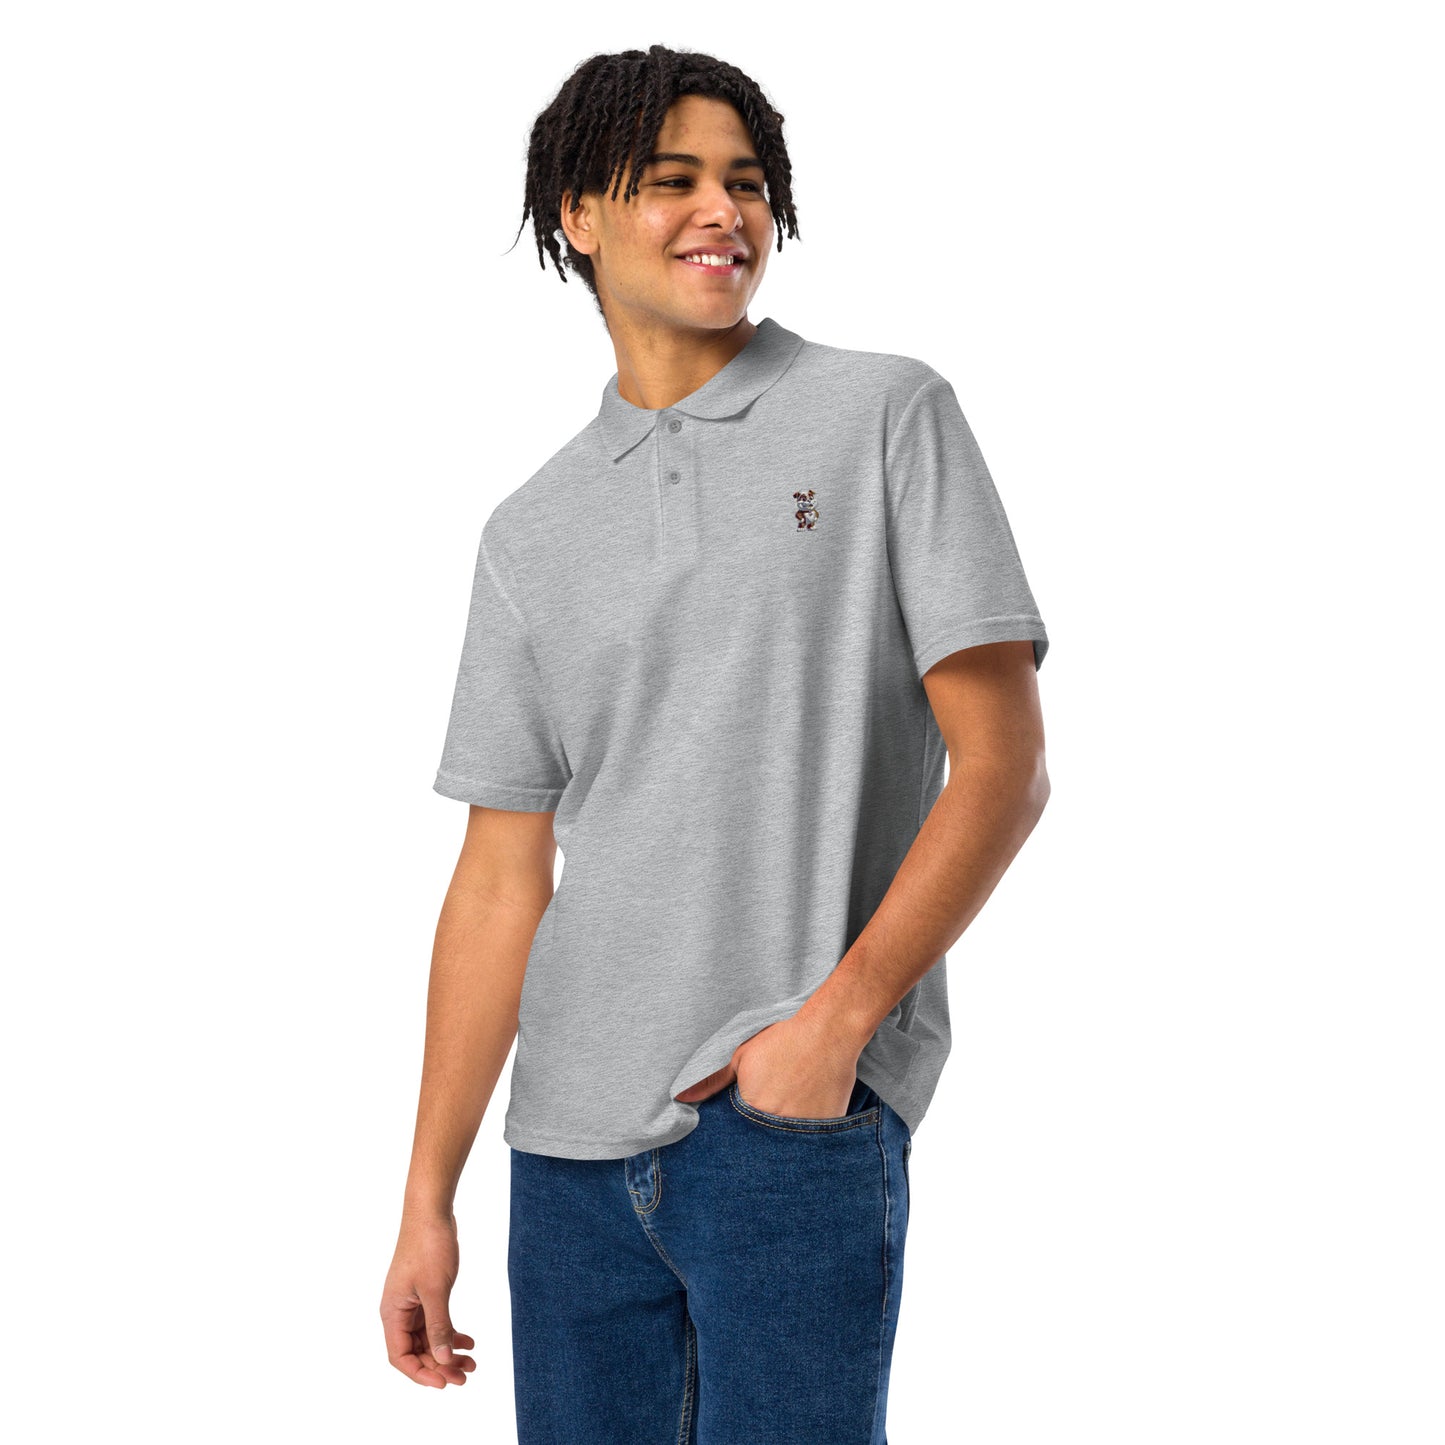 The only one: Unisex polo shirt